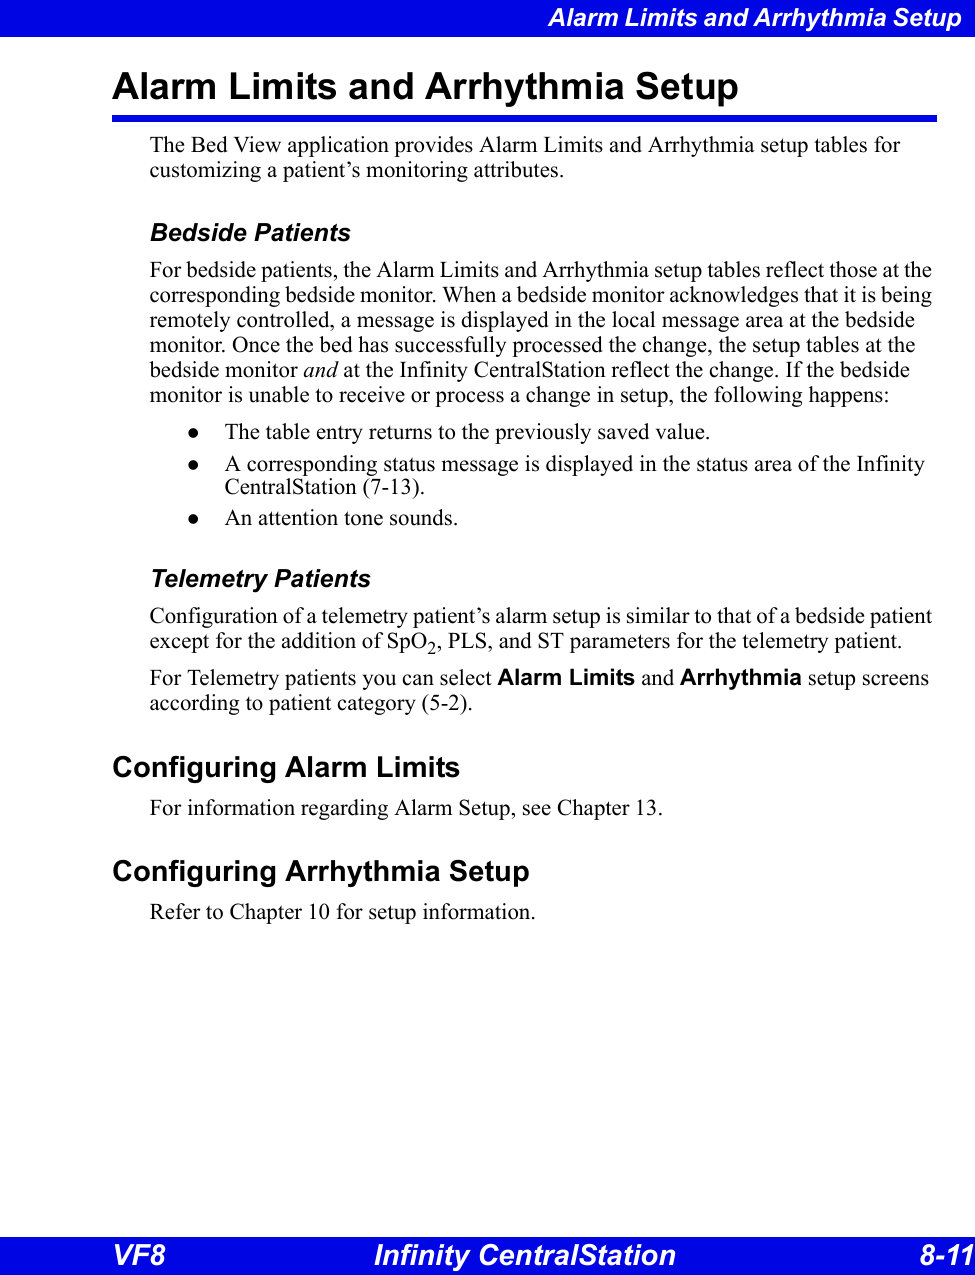 Alarm Limits and Arrhythmia Setup VF8 Infinity CentralStation 8-11 Alarm Limits and Arrhythmia SetupThe Bed View application provides Alarm Limits and Arrhythmia setup tables for customizing a patient’s monitoring attributes. Bedside PatientsFor bedside patients, the Alarm Limits and Arrhythmia setup tables reflect those at the corresponding bedside monitor. When a bedside monitor acknowledges that it is being remotely controlled, a message is displayed in the local message area at the bedside monitor. Once the bed has successfully processed the change, the setup tables at the bedside monitor and at the Infinity CentralStation reflect the change. If the bedside monitor is unable to receive or process a change in setup, the following happens:zThe table entry returns to the previously saved value. zA corresponding status message is displayed in the status area of the Infinity CentralStation (7-13).zAn attention tone sounds.Telemetry PatientsConfiguration of a telemetry patient’s alarm setup is similar to that of a bedside patient except for the addition of SpO2, PLS, and ST parameters for the telemetry patient. For Telemetry patients you can select Alarm Limits and Arrhythmia setup screens according to patient category (5-2).  Configuring Alarm LimitsFor information regarding Alarm Setup, see Chapter 13.Configuring Arrhythmia SetupRefer to Chapter 10 for setup information. 